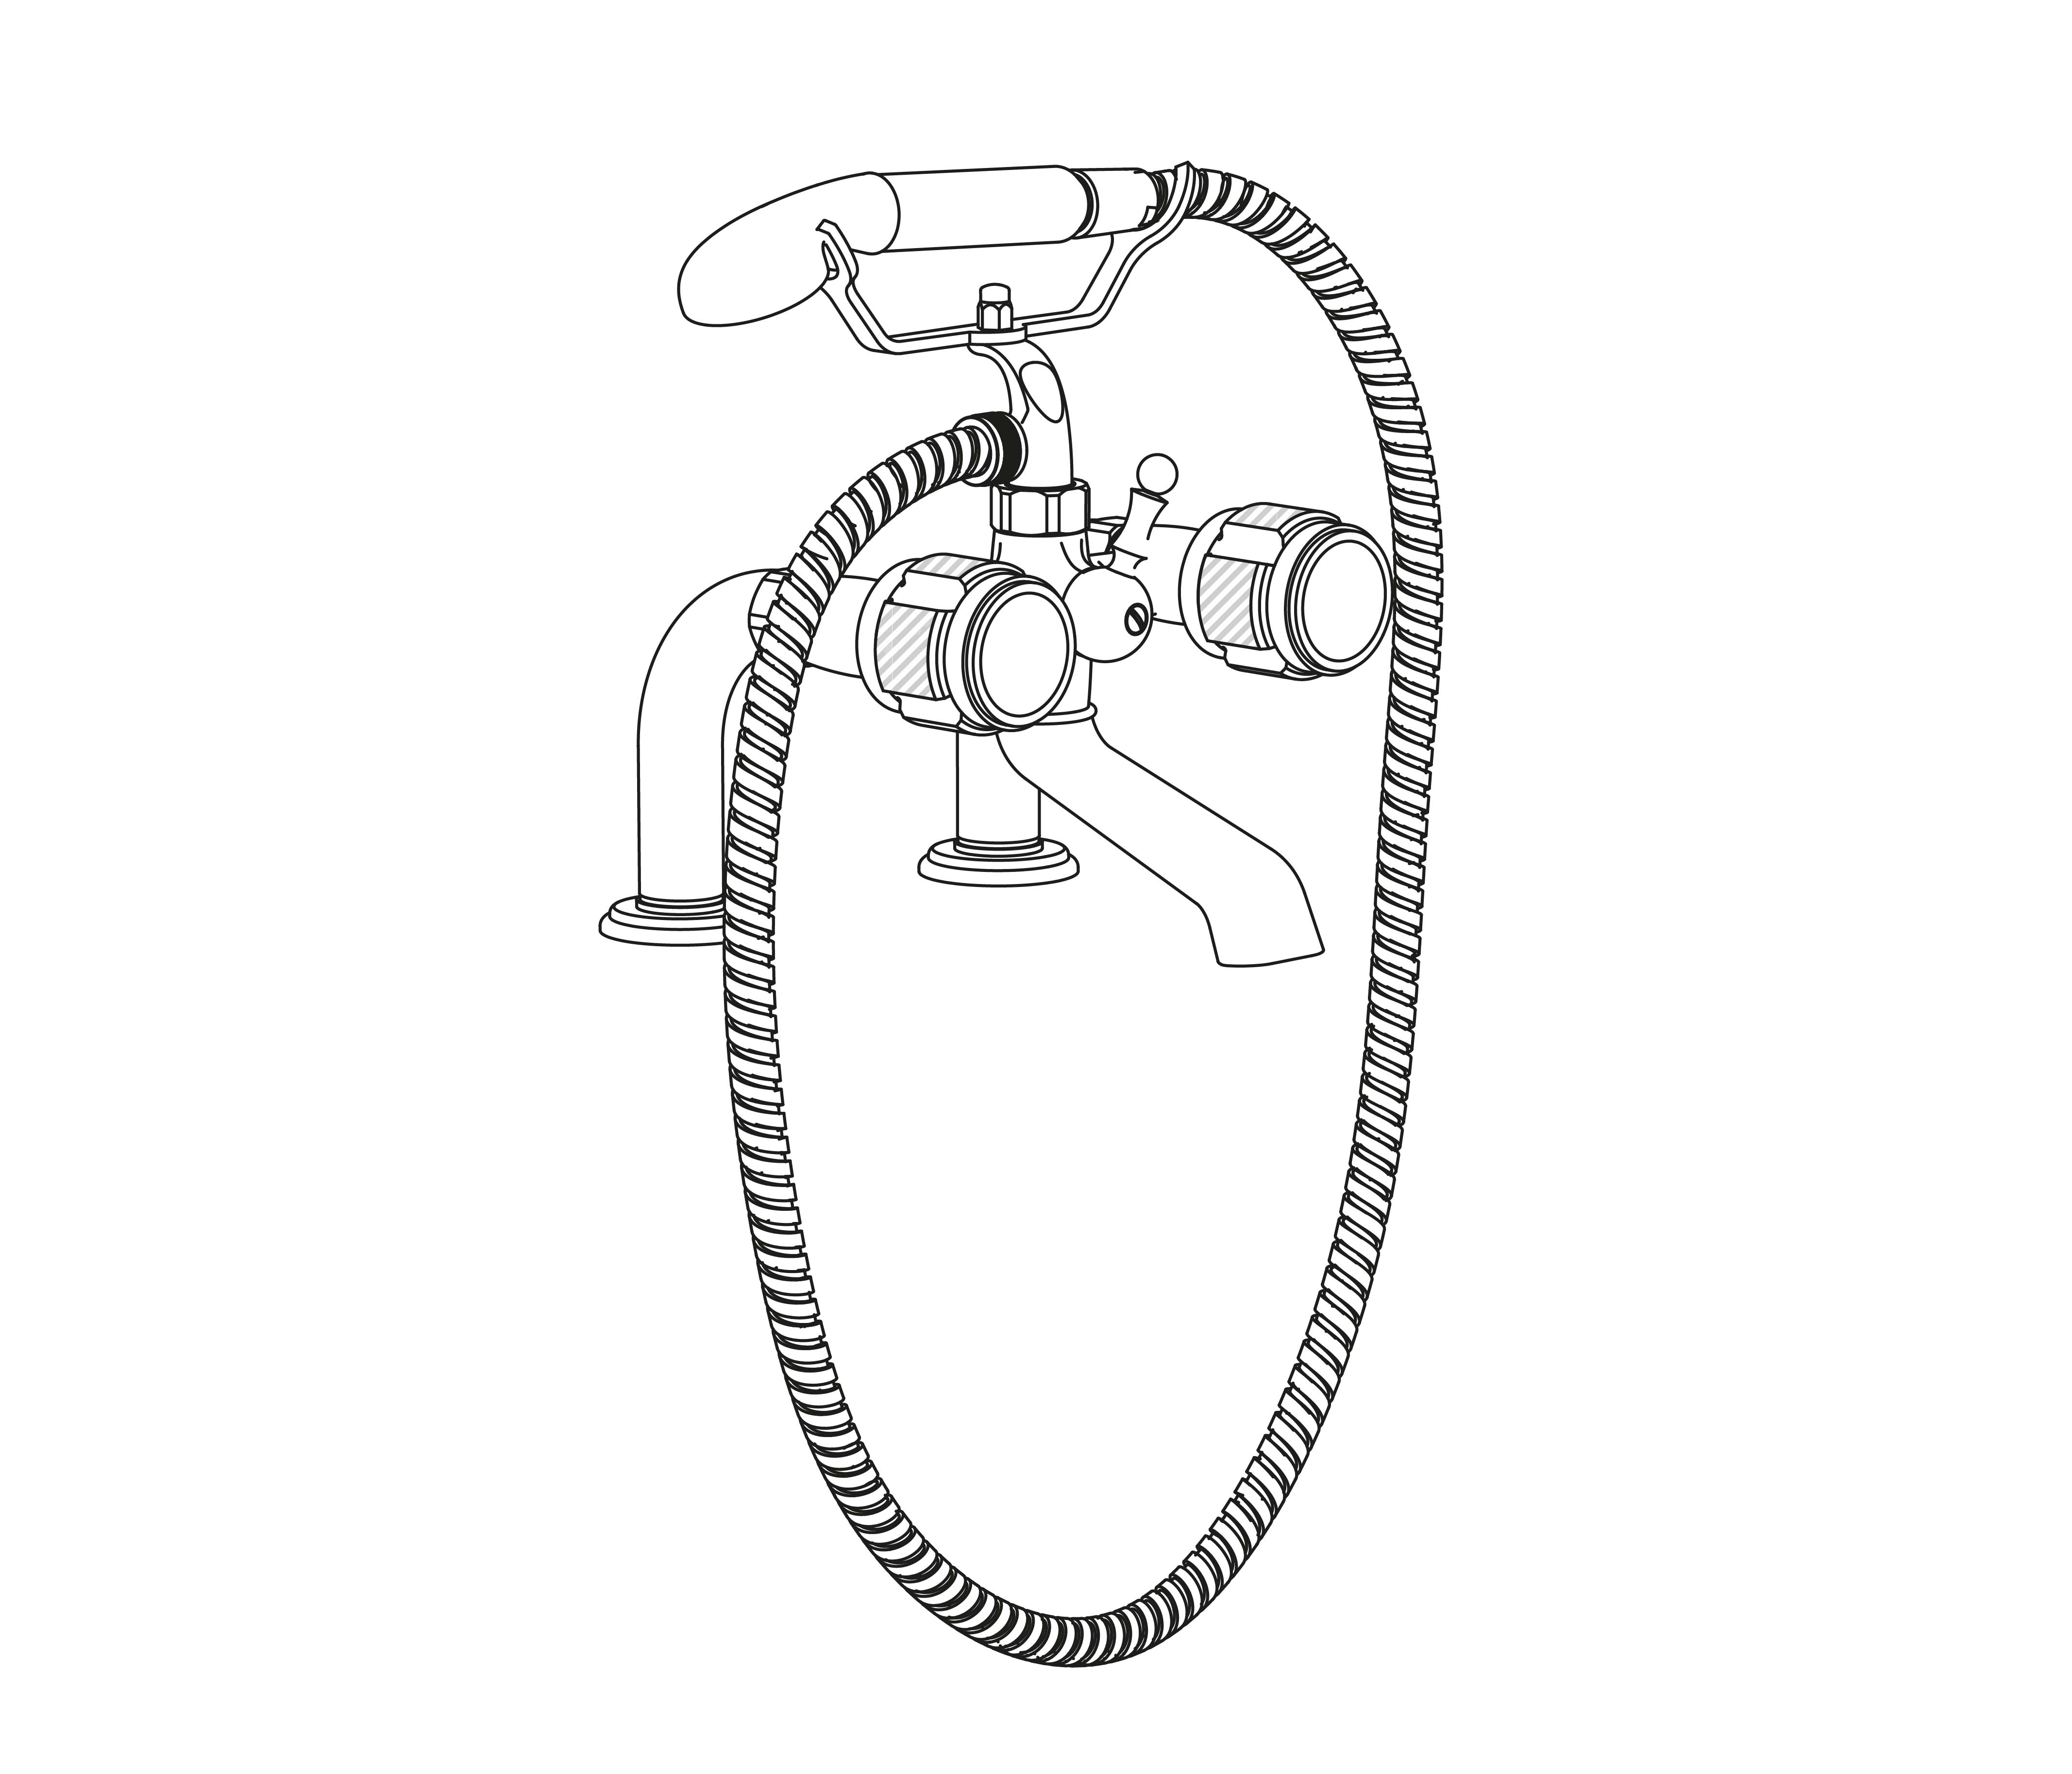 S84-3306 Rim mounted bath and shower mixer